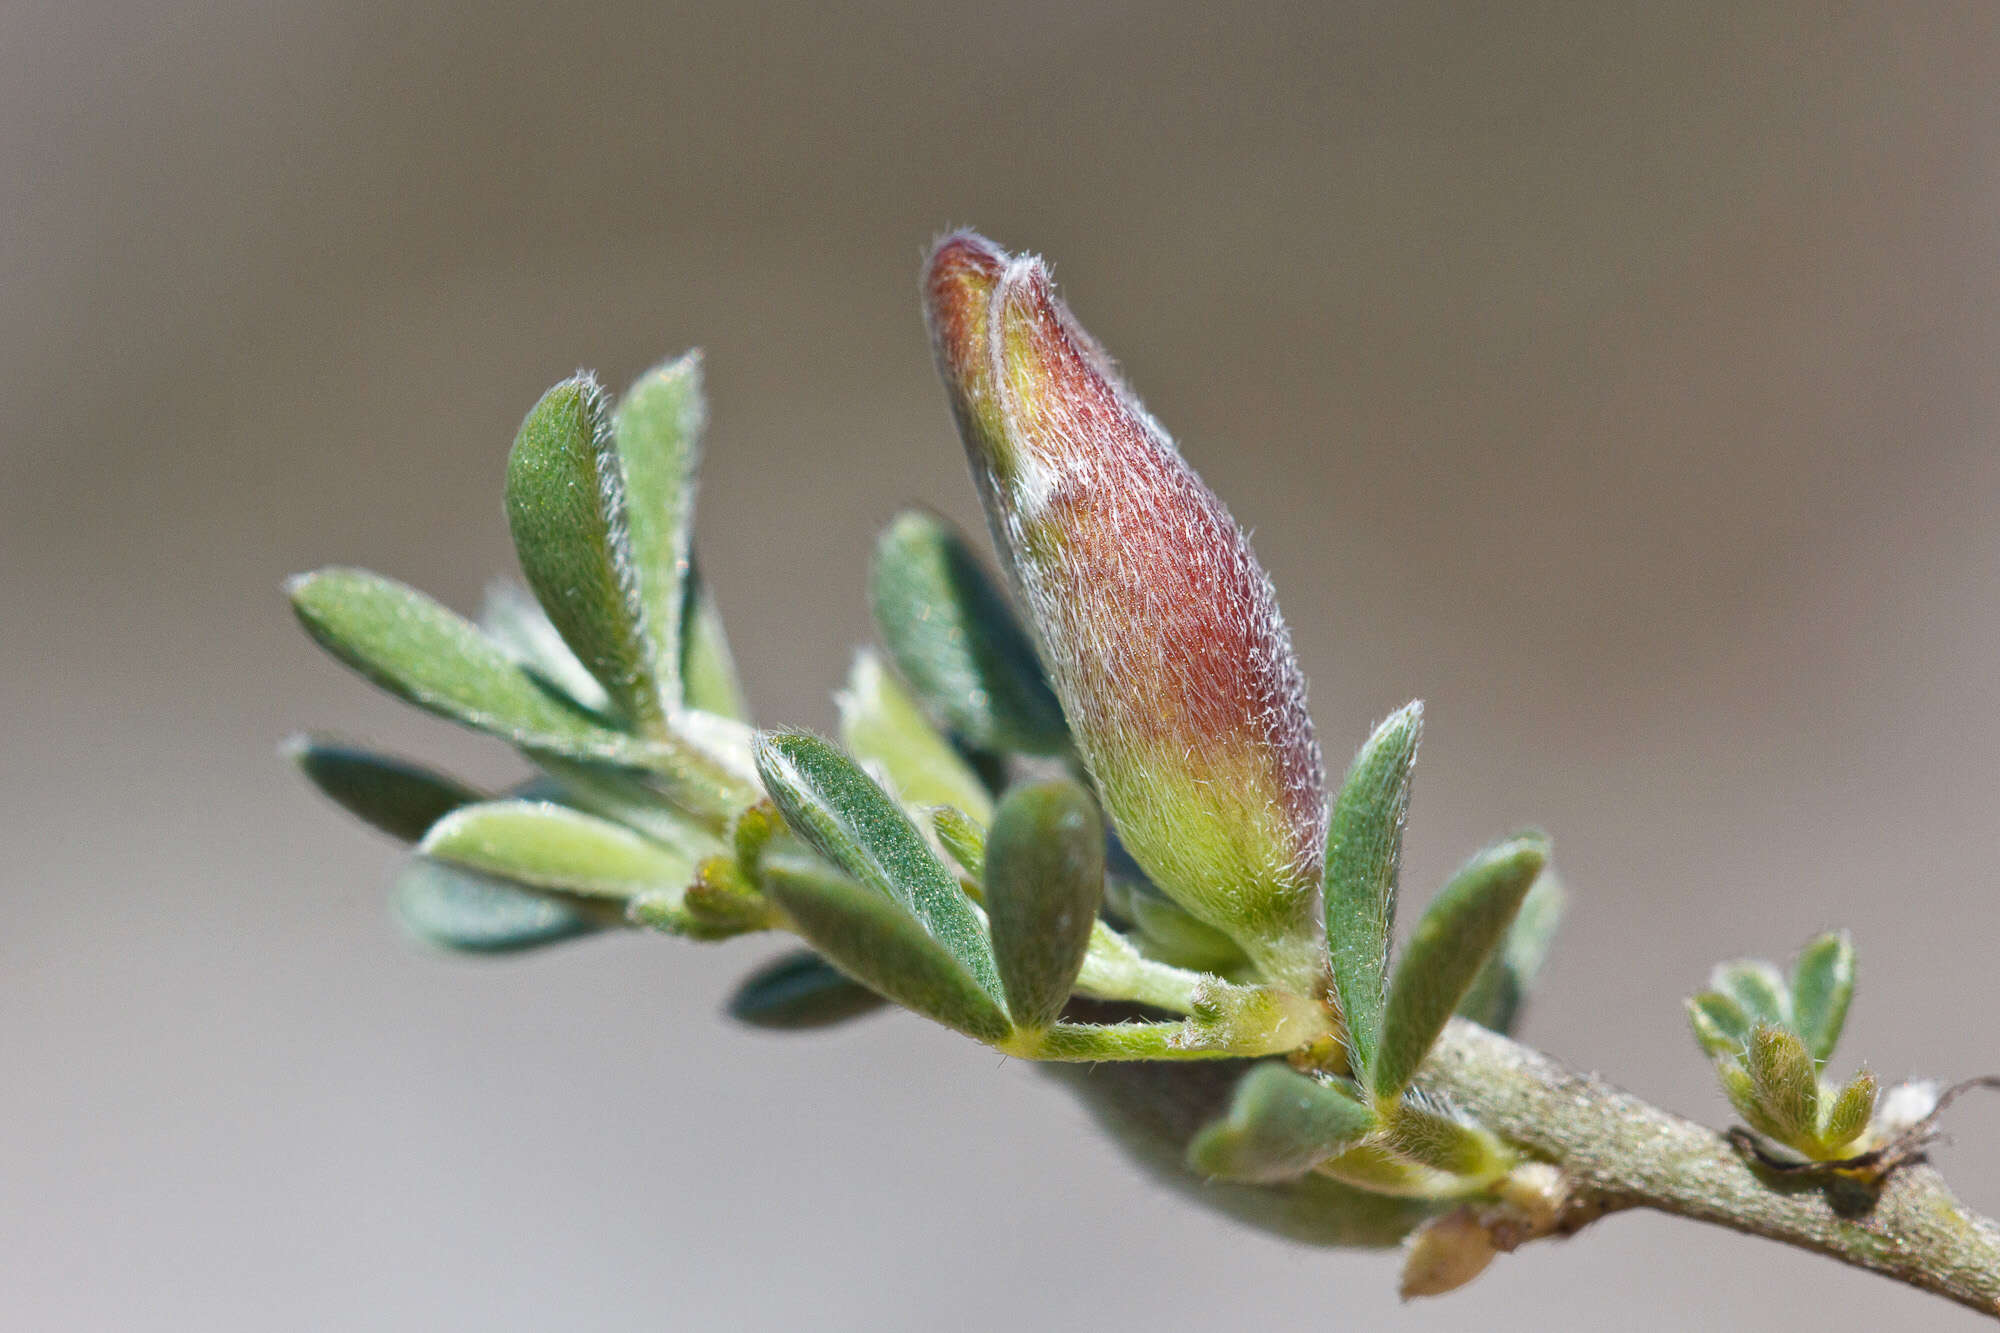 Image of Cytisus spinescens C. Presl